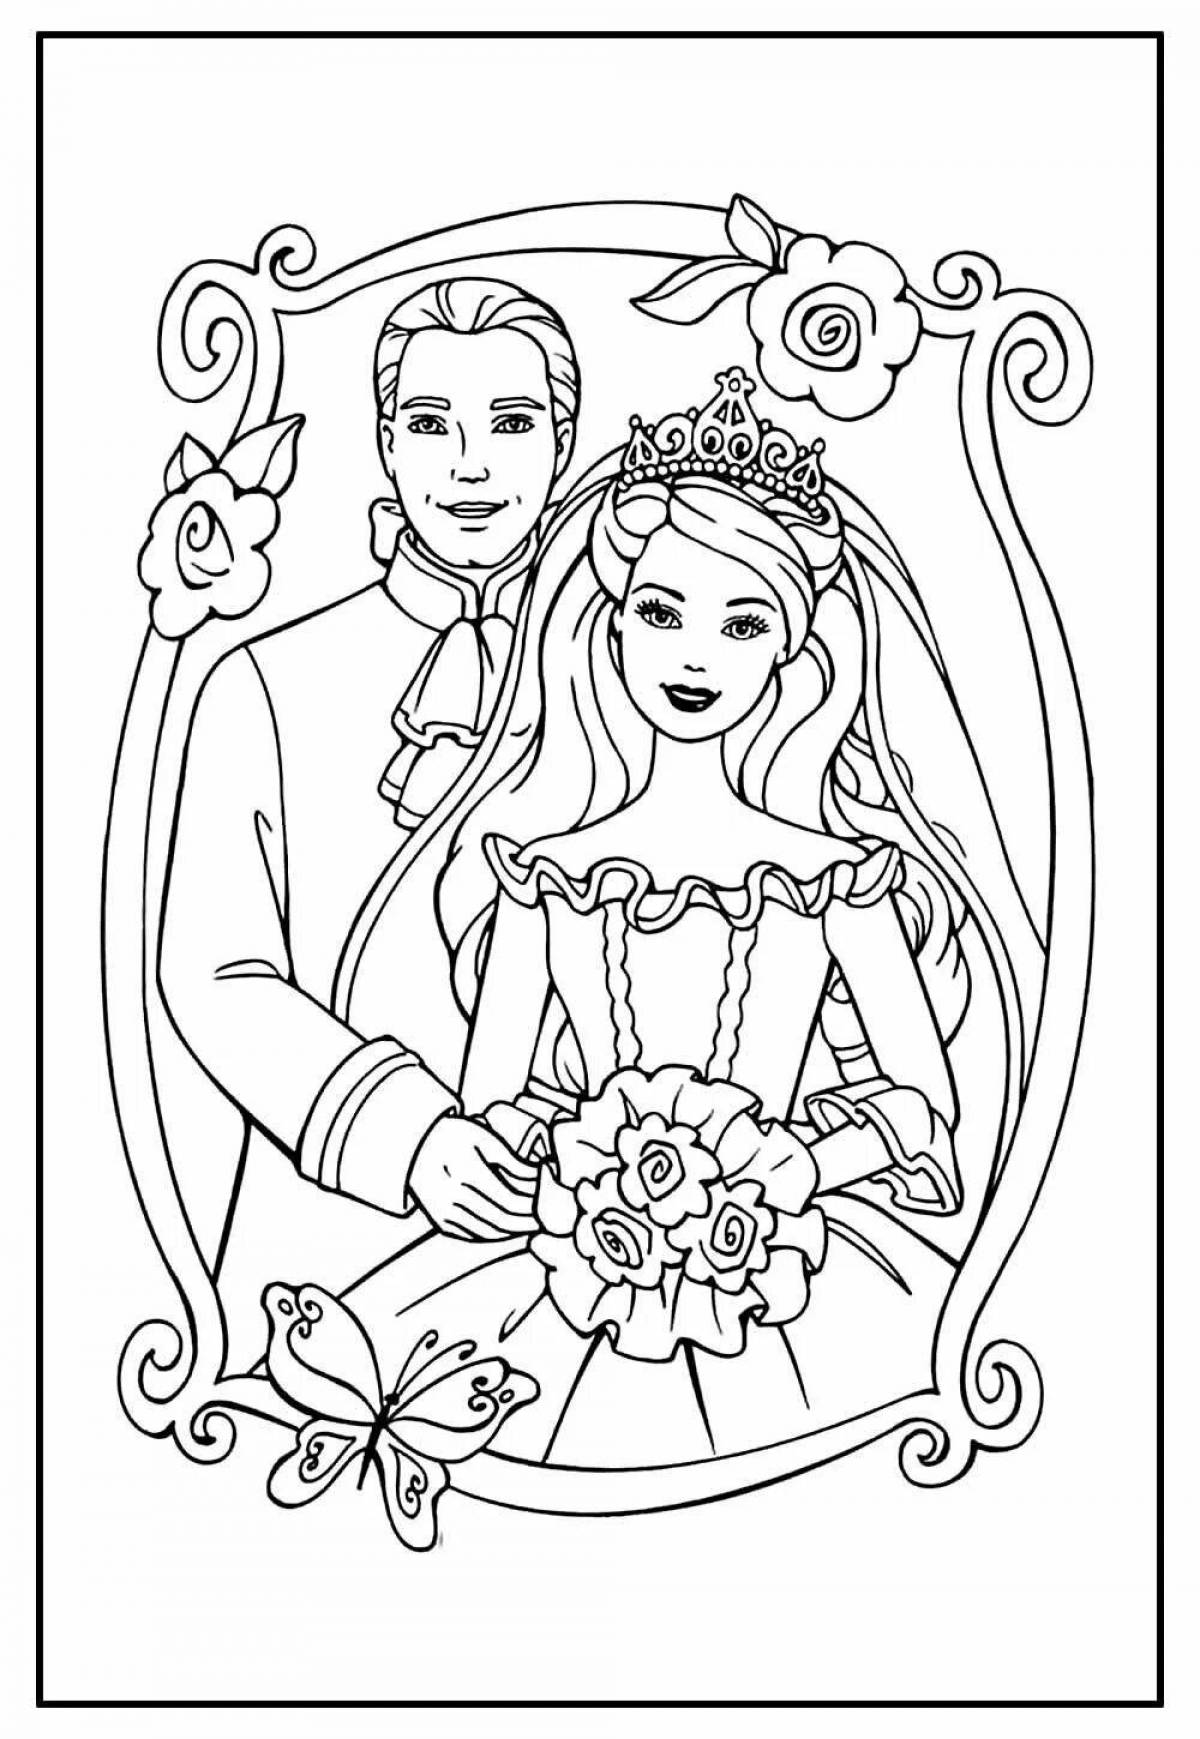 Exquisite wedding coloring book for kids